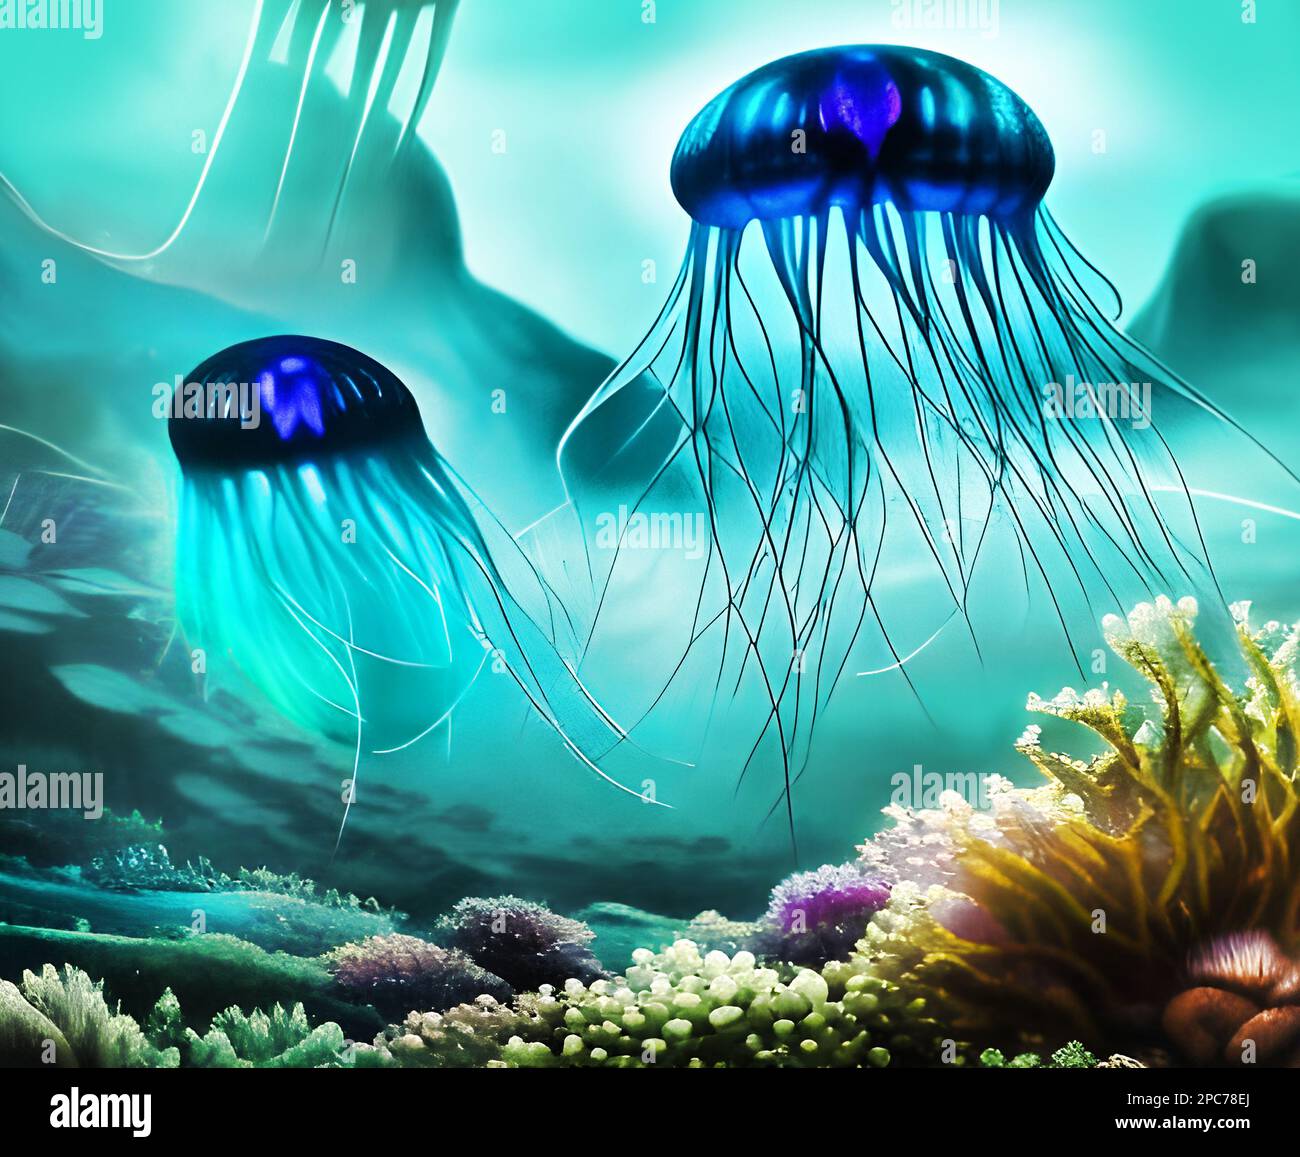 Luminescent jellyfish in ocean depiction. Stock Photo